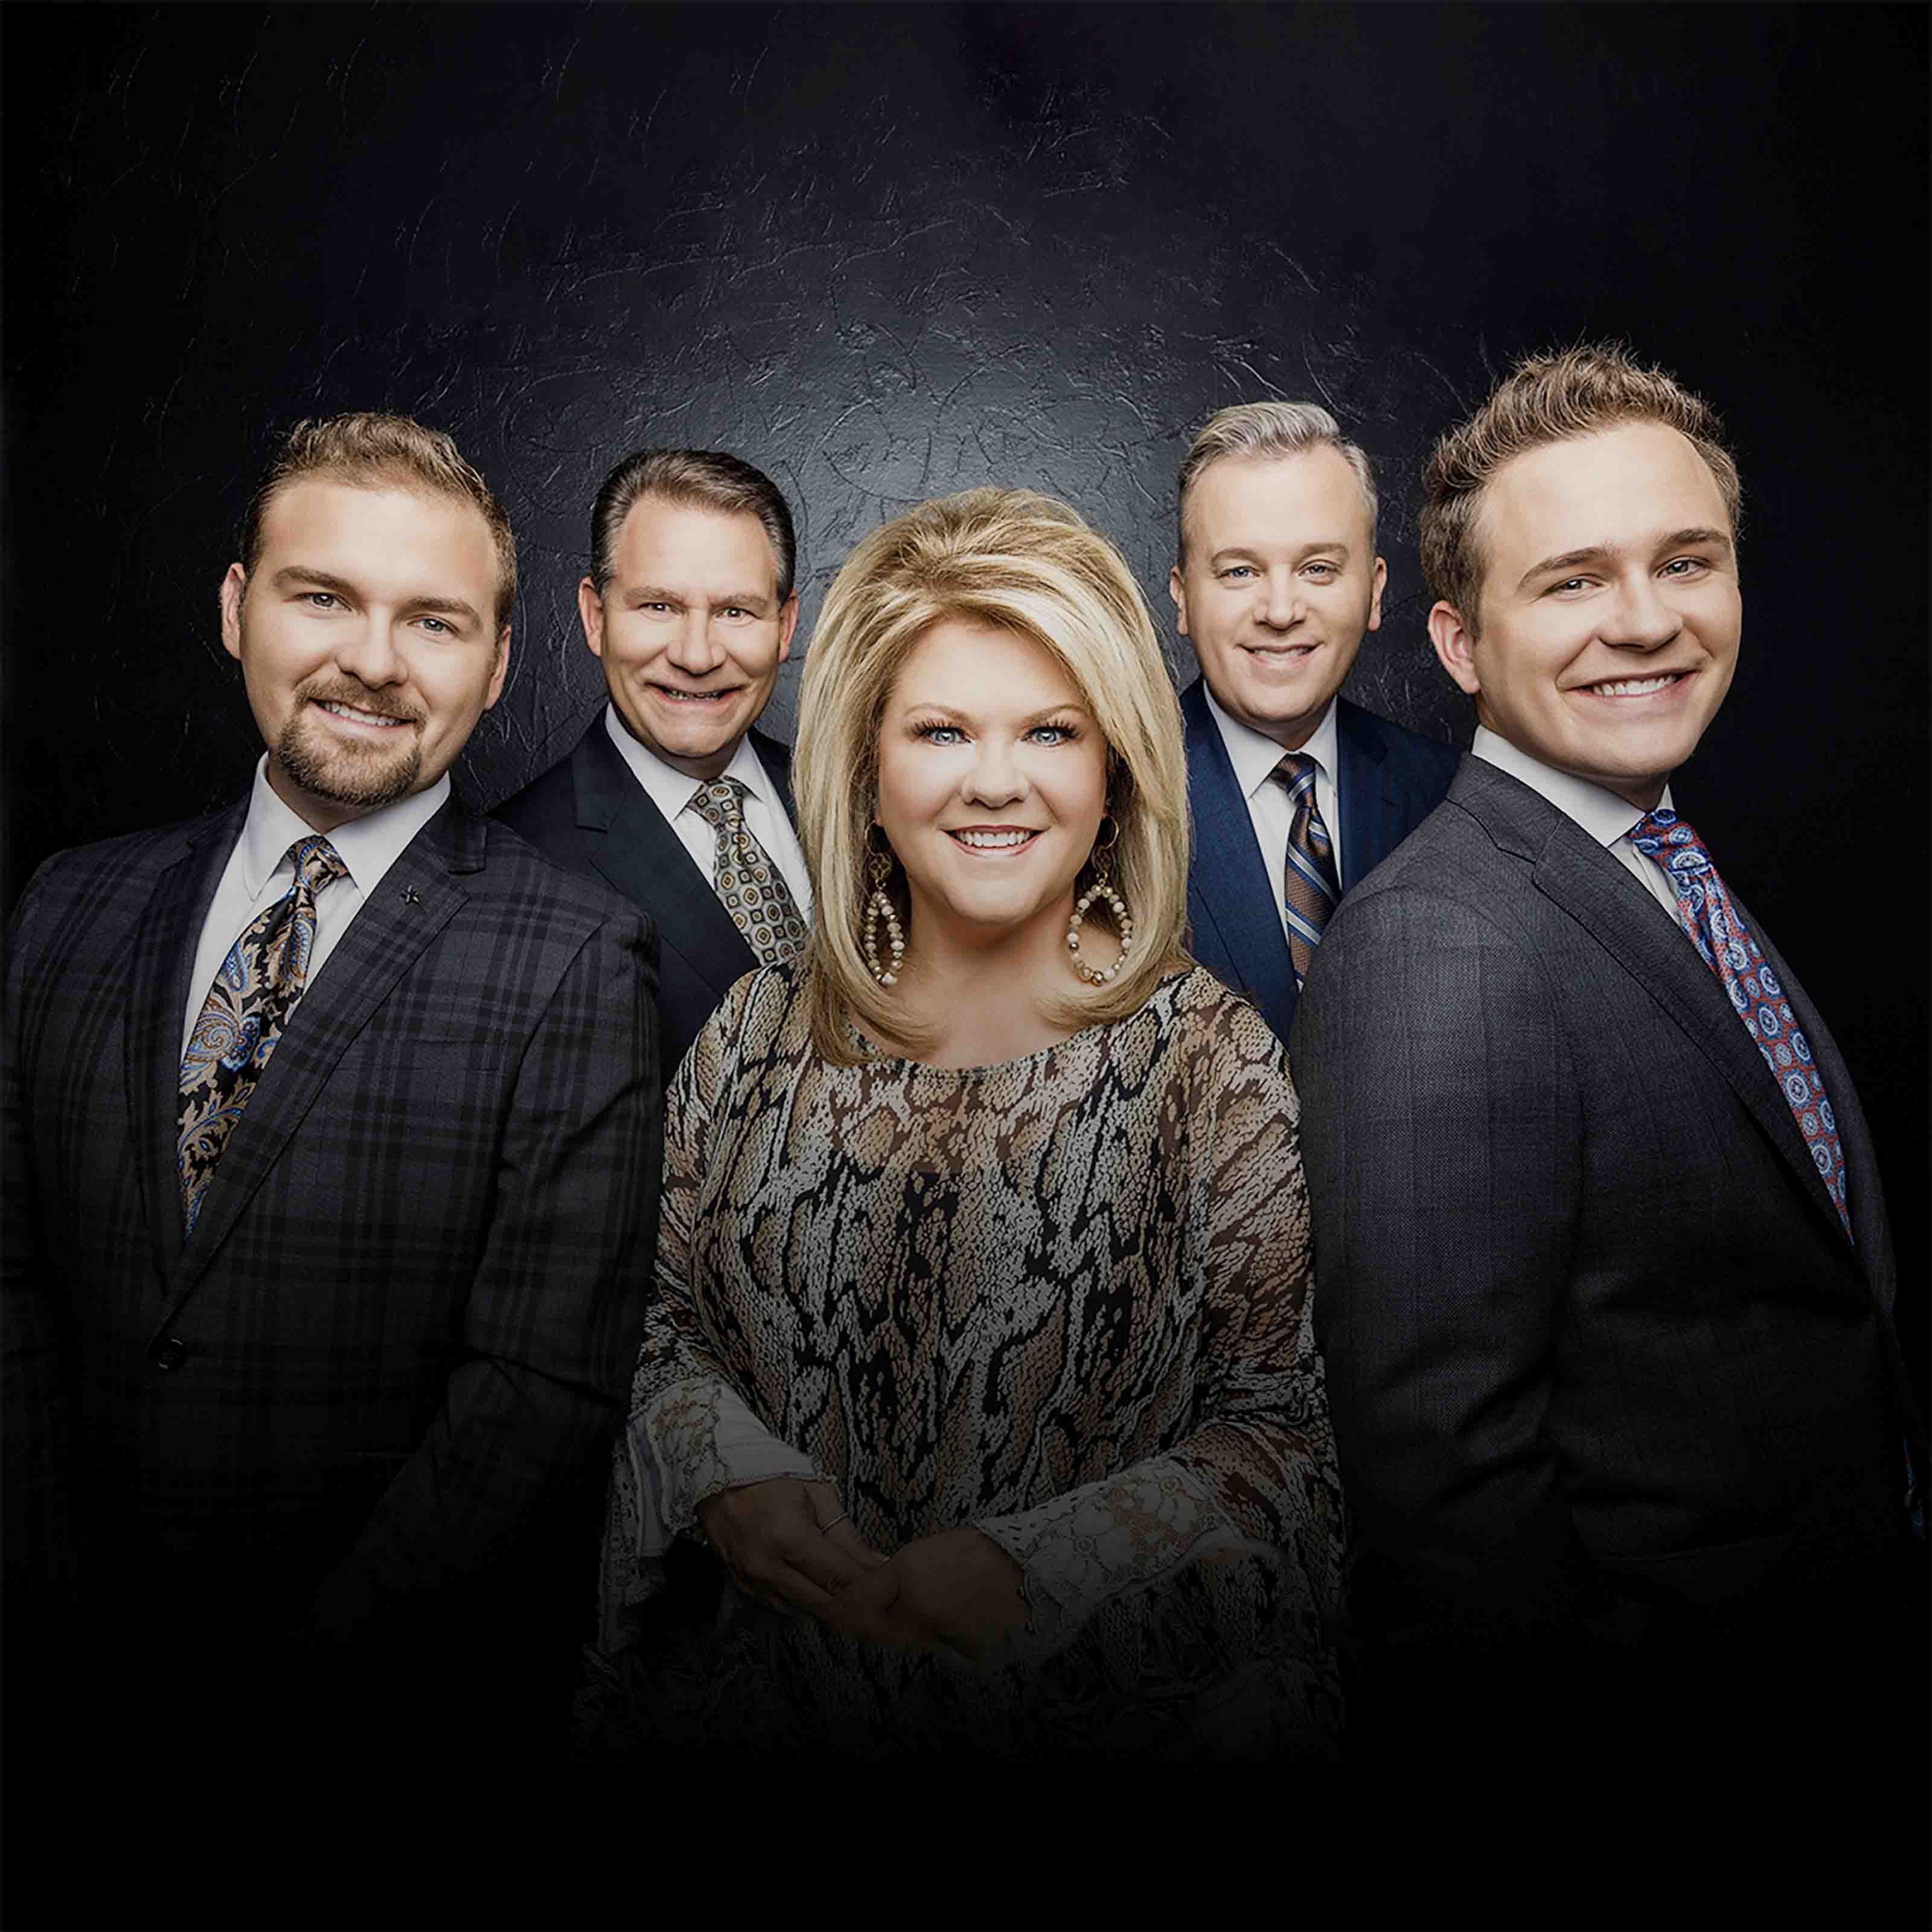 40 Days & Nights Of Christian Music | Whisnants